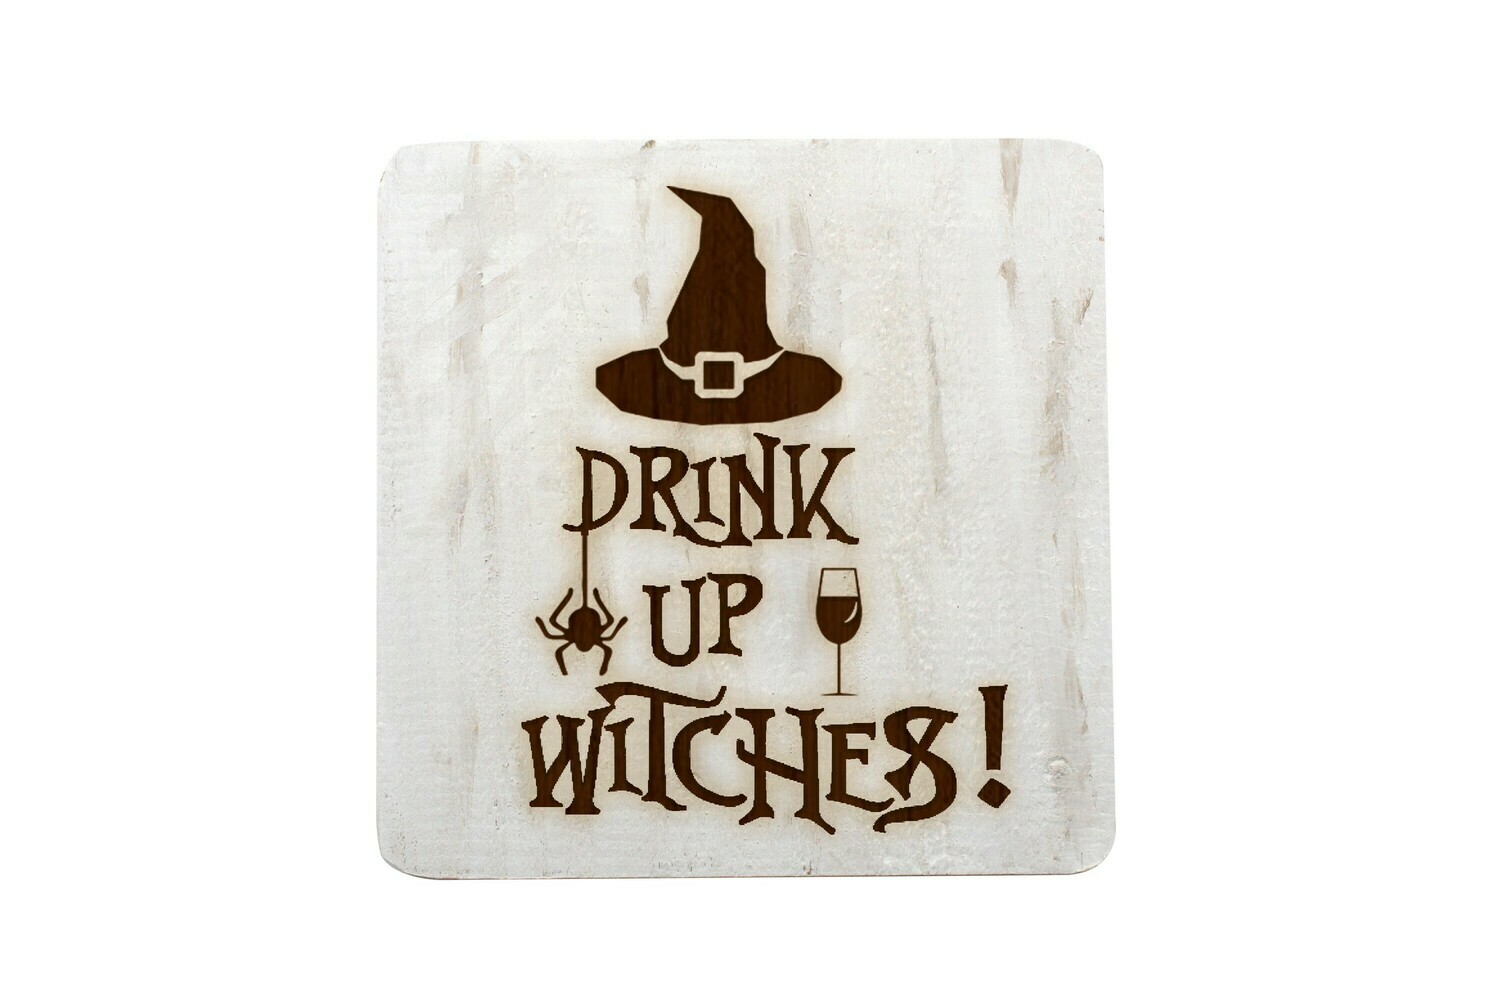 Drink up Witches Hand-Painted Wood Coaster Set.